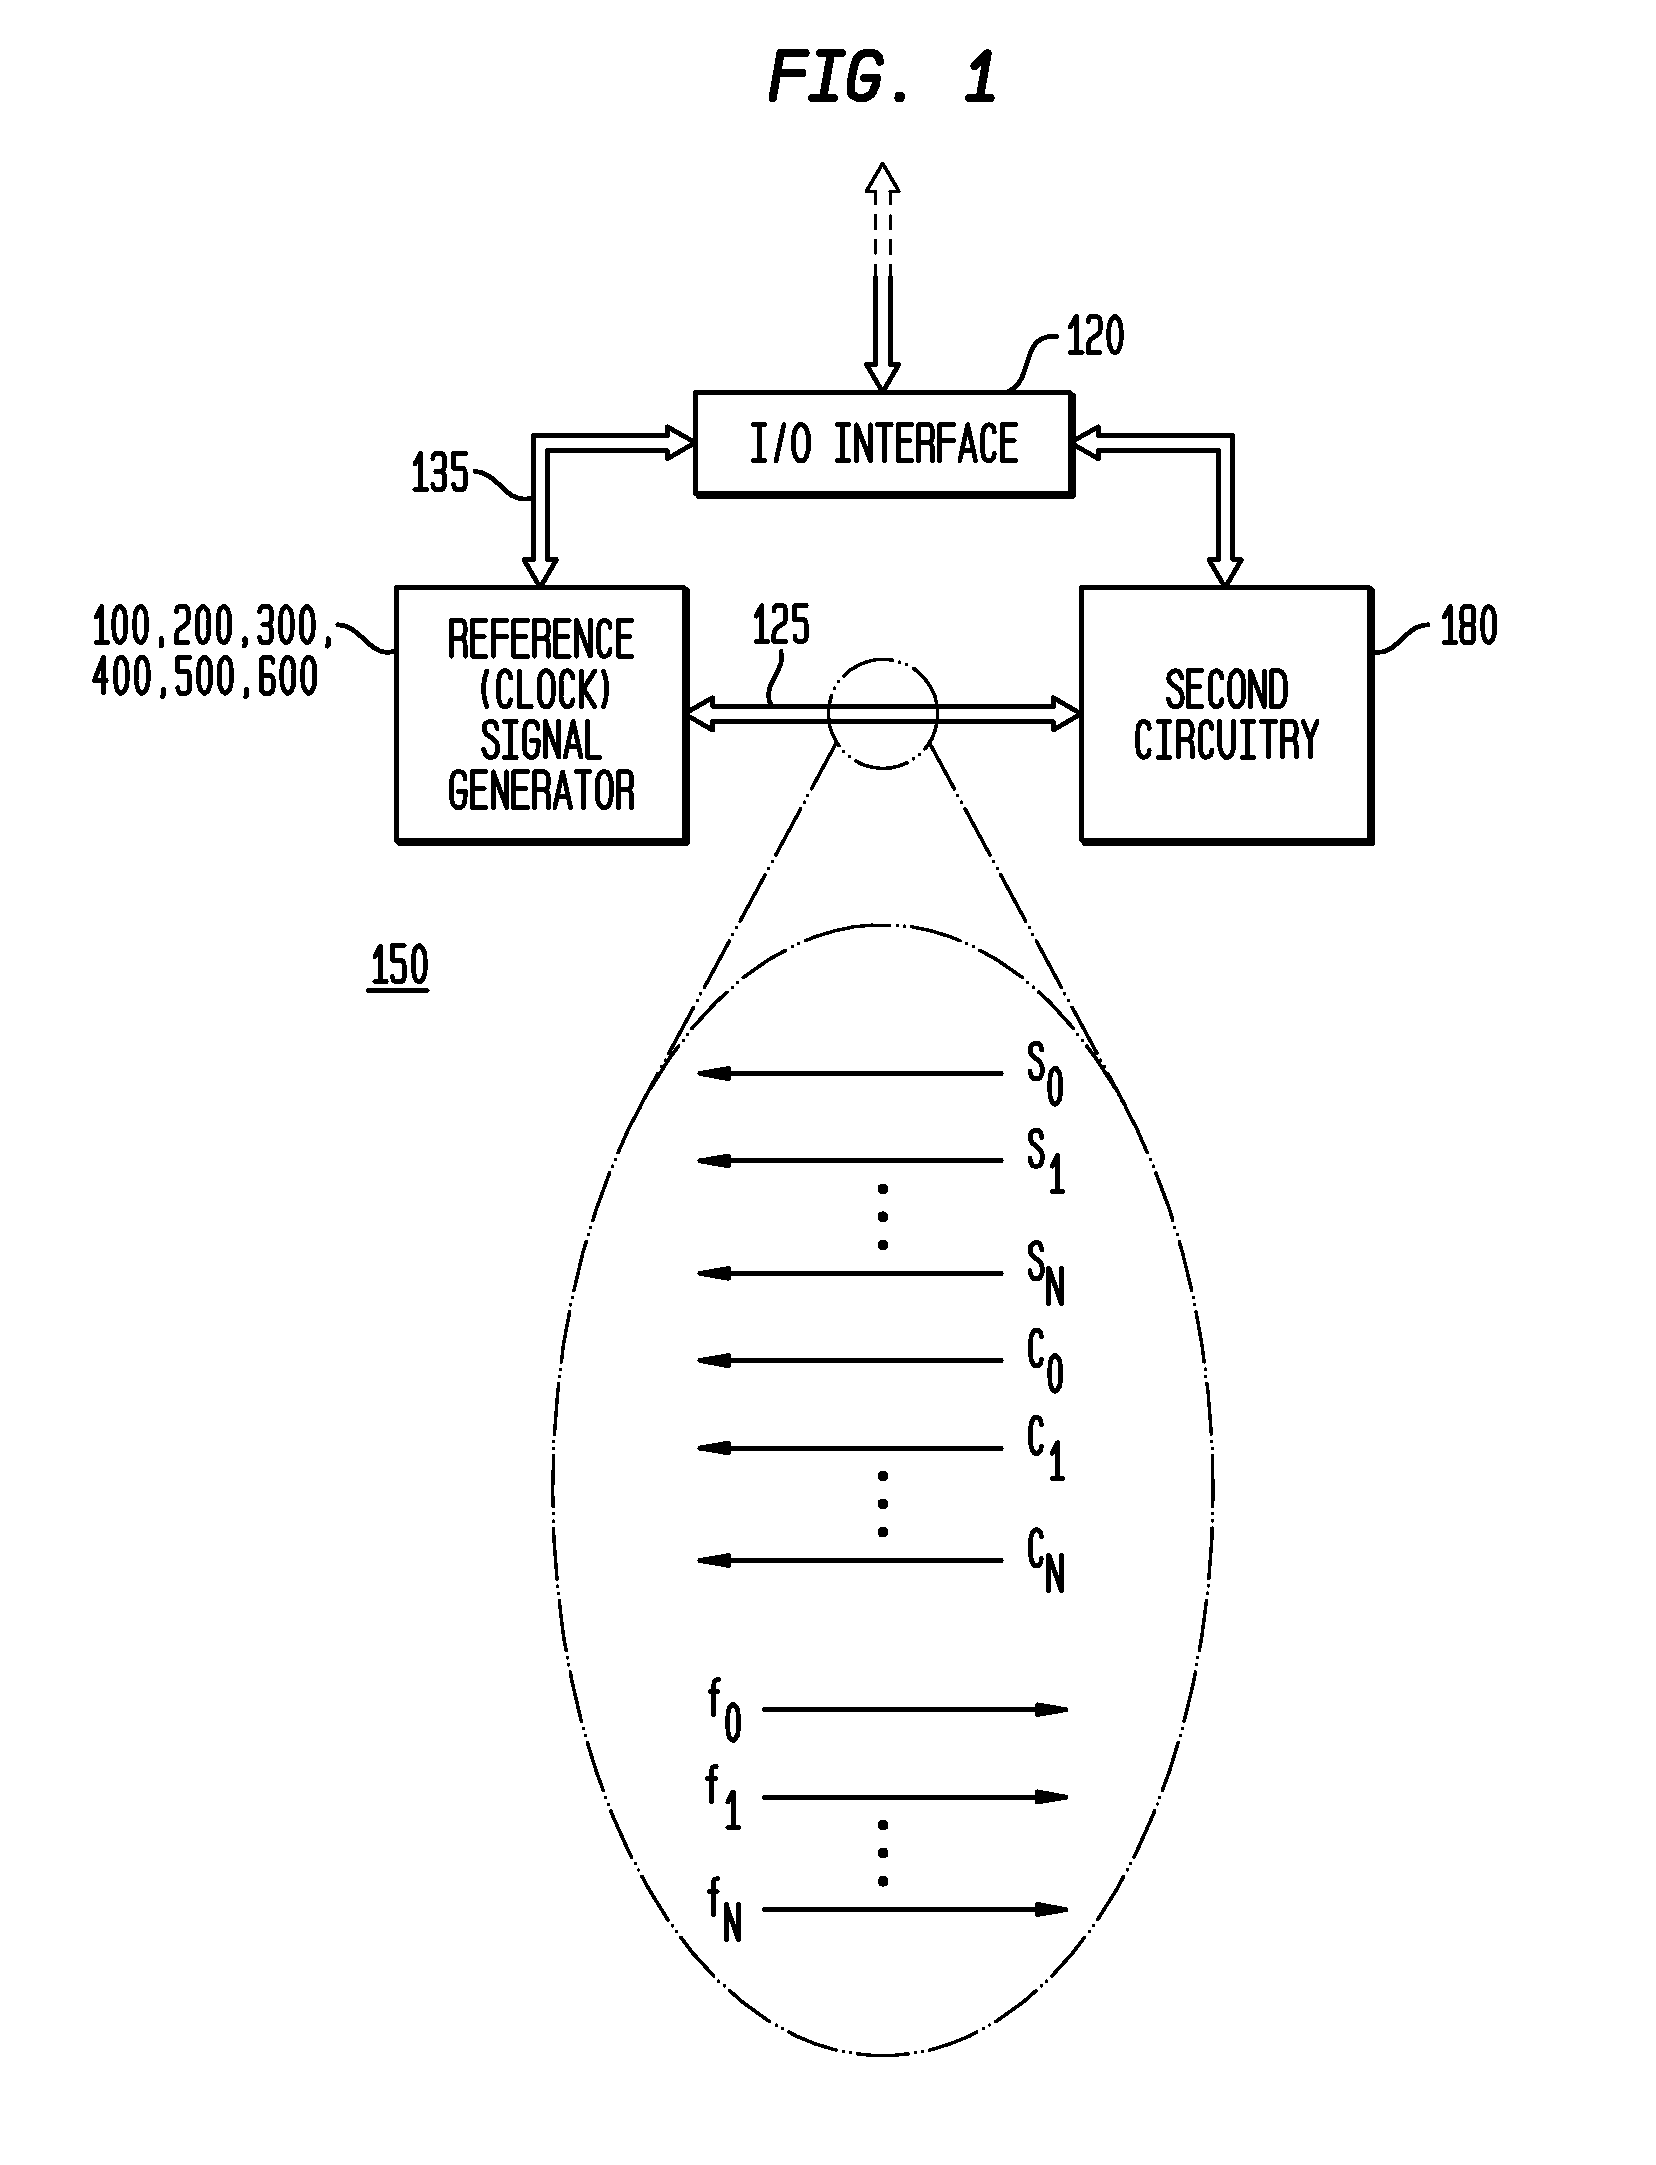 Common Mode Controller for a Clock, Frequency Reference, and Other Reference Signal Generator